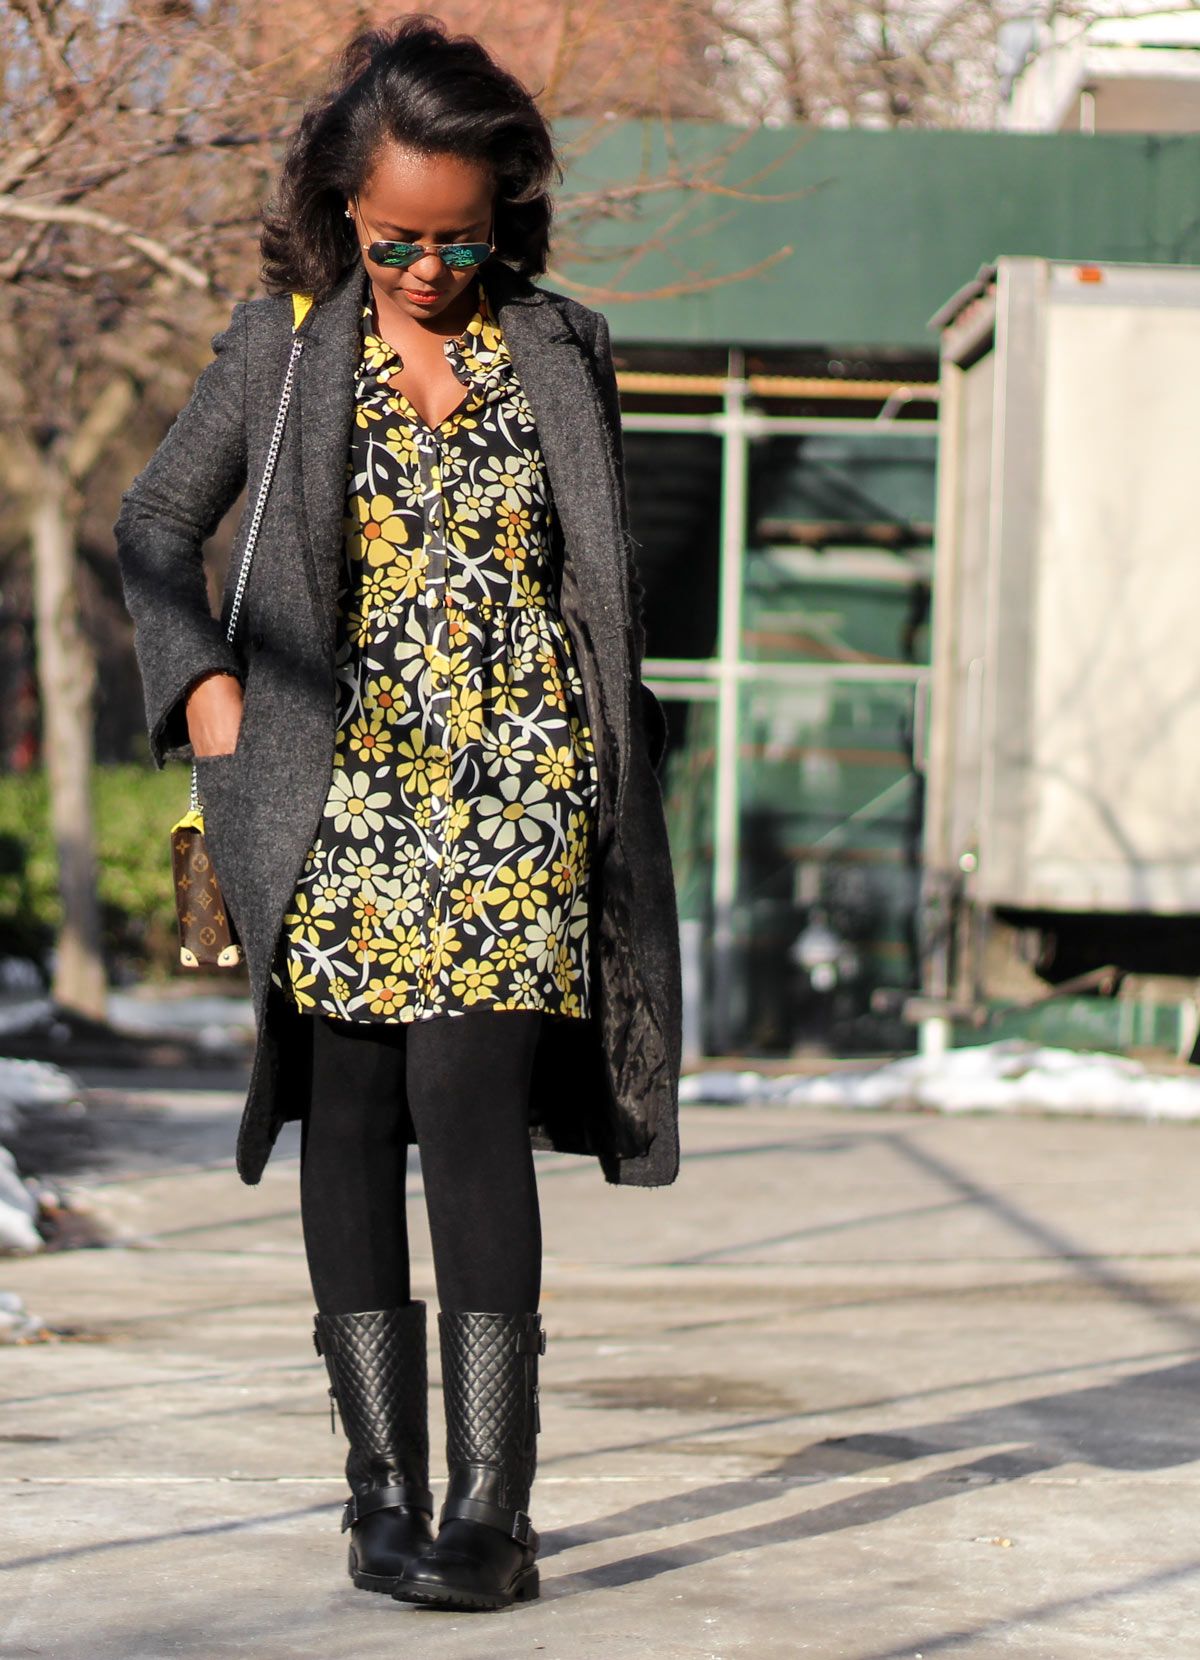 Topshop DAISY PRINT SHIRT DRESS and RayBan Aviators Chanel Quilted Rain Boots